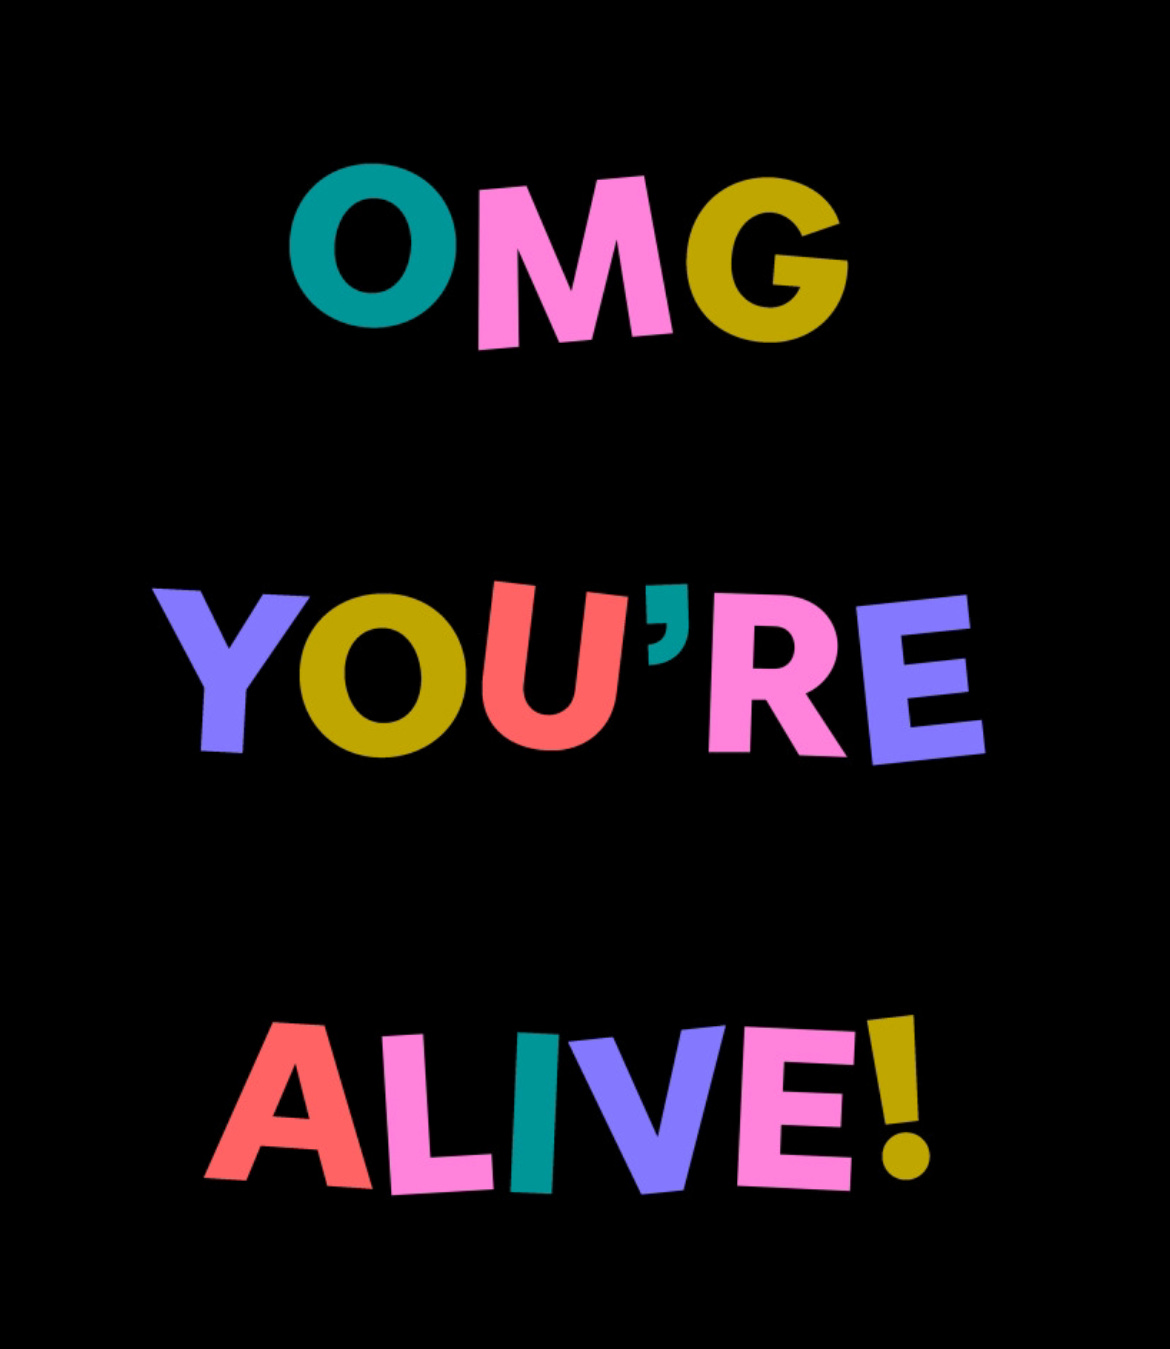 Colorful graphic that reads "OMG you're alive!"